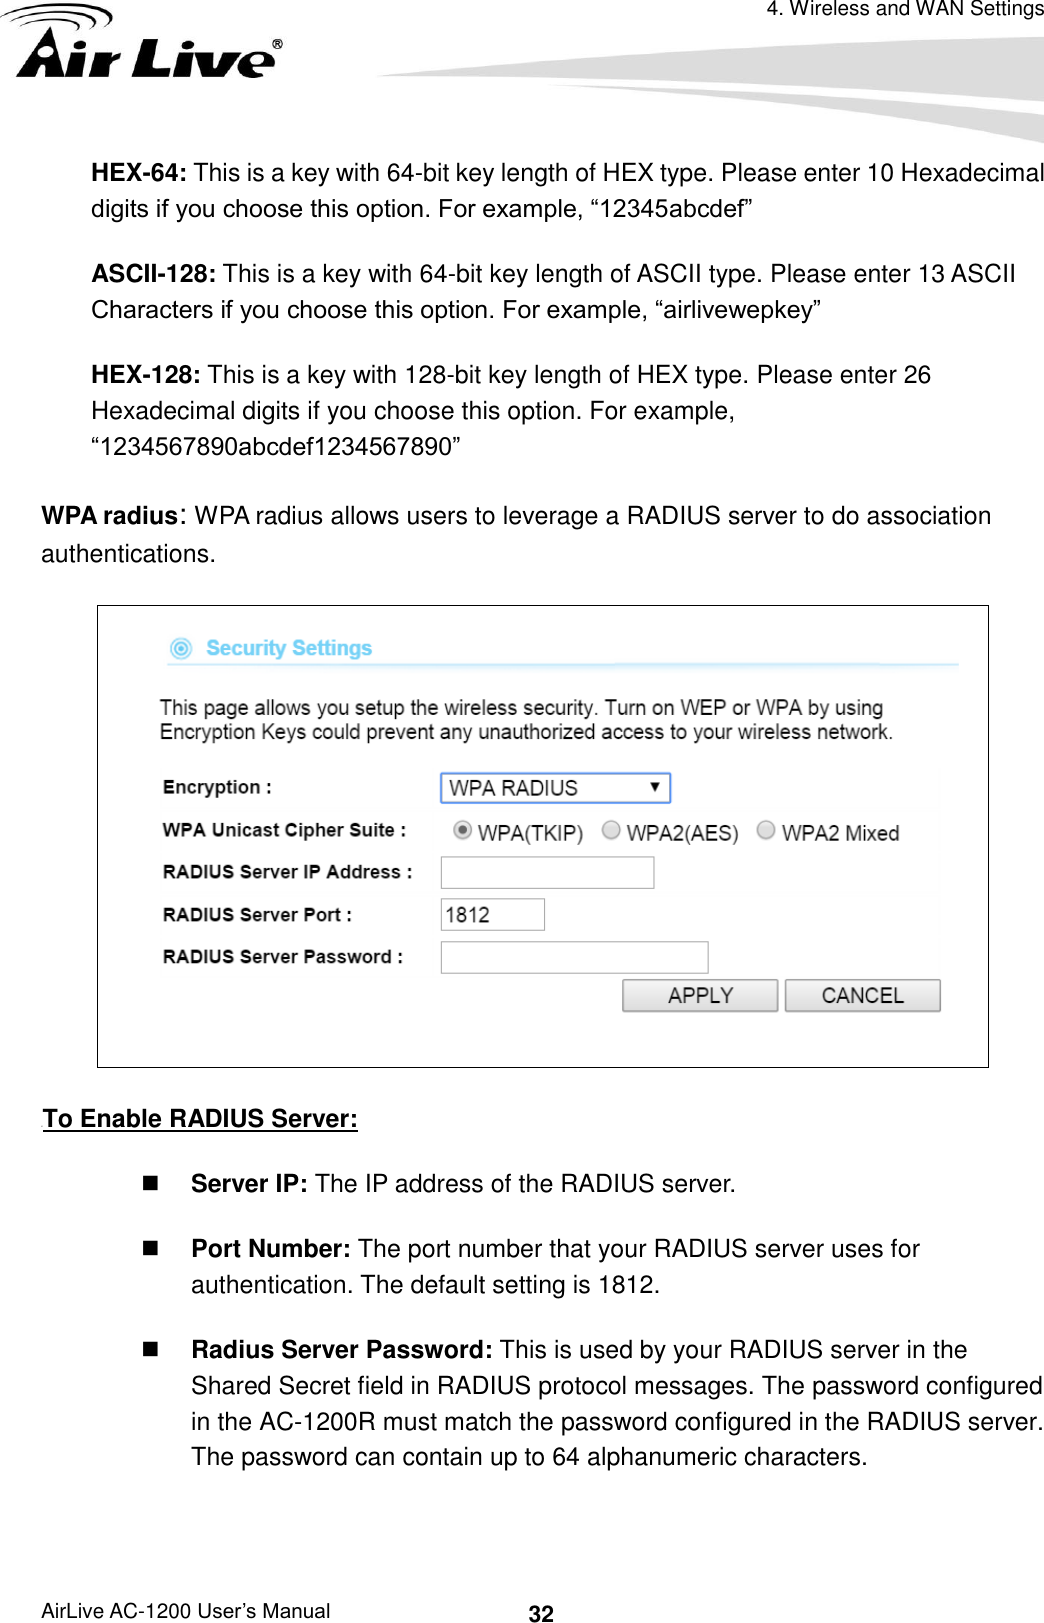 4. Wireless and WAN Settings AirLive AC-1200 User’s Manual 32 HEX-64: This is a key with 64-bit key length of HEX type. Please enter 10 Hexadecimal digits if you choose this option. For example, “12345abcdef” ASCII-128: This is a key with 64-bit key length of ASCII type. Please enter 13 ASCII Characters if you choose this option. For example, “airlivewepkey” HEX-128: This is a key with 128-bit key length of HEX type. Please enter 26 Hexadecimal digits if you choose this option. For example, “1234567890abcdef1234567890” WPA radius: WPA radius allows users to leverage a RADIUS server to do association authentications.    UTo Enable RADIUS Server:  Server IP: The IP address of the RADIUS server.    Port Number: The port number that your RADIUS server uses for authentication. The default setting is 1812.    Radius Server Password: This is used by your RADIUS server in the Shared Secret field in RADIUS protocol messages. The password configured in the AC-1200R must match the password configured in the RADIUS server. The password can contain up to 64 alphanumeric characters.    